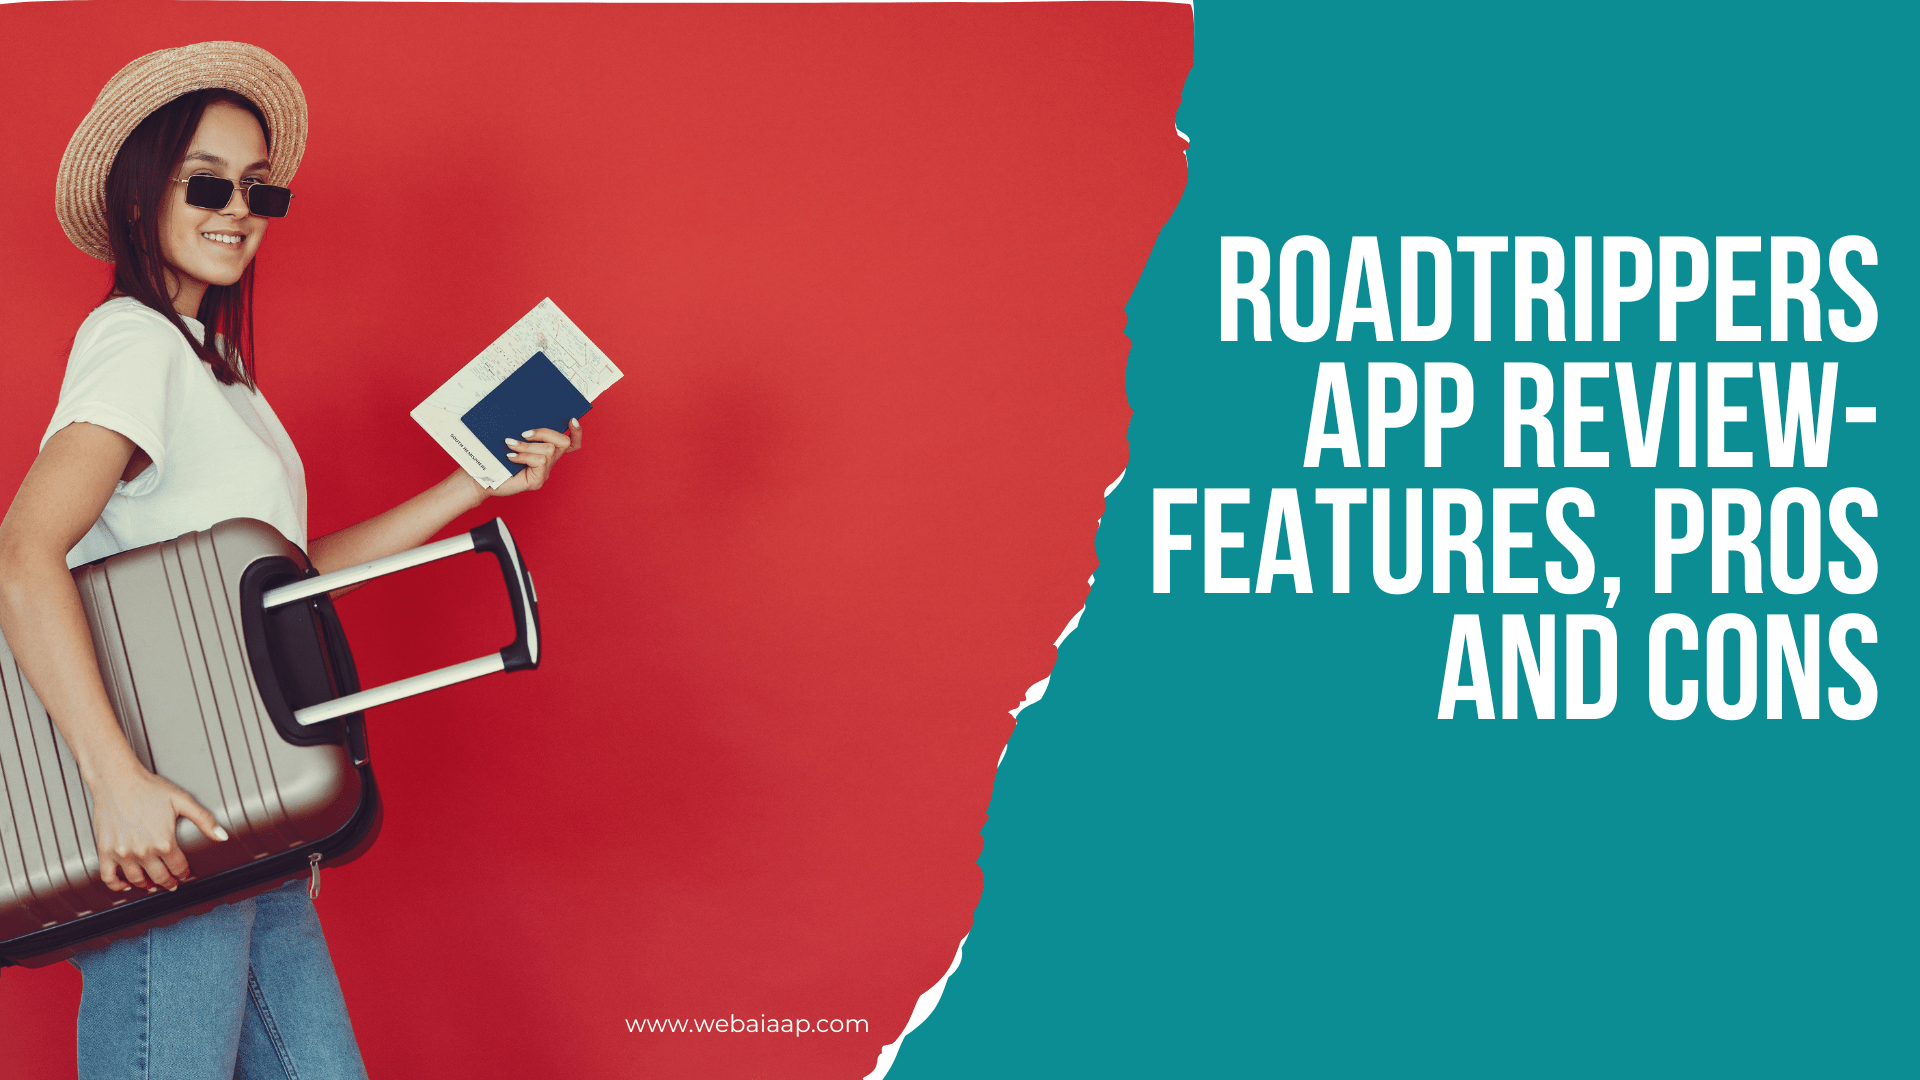 Roadtrippers App Review-Features, Pros and Cons